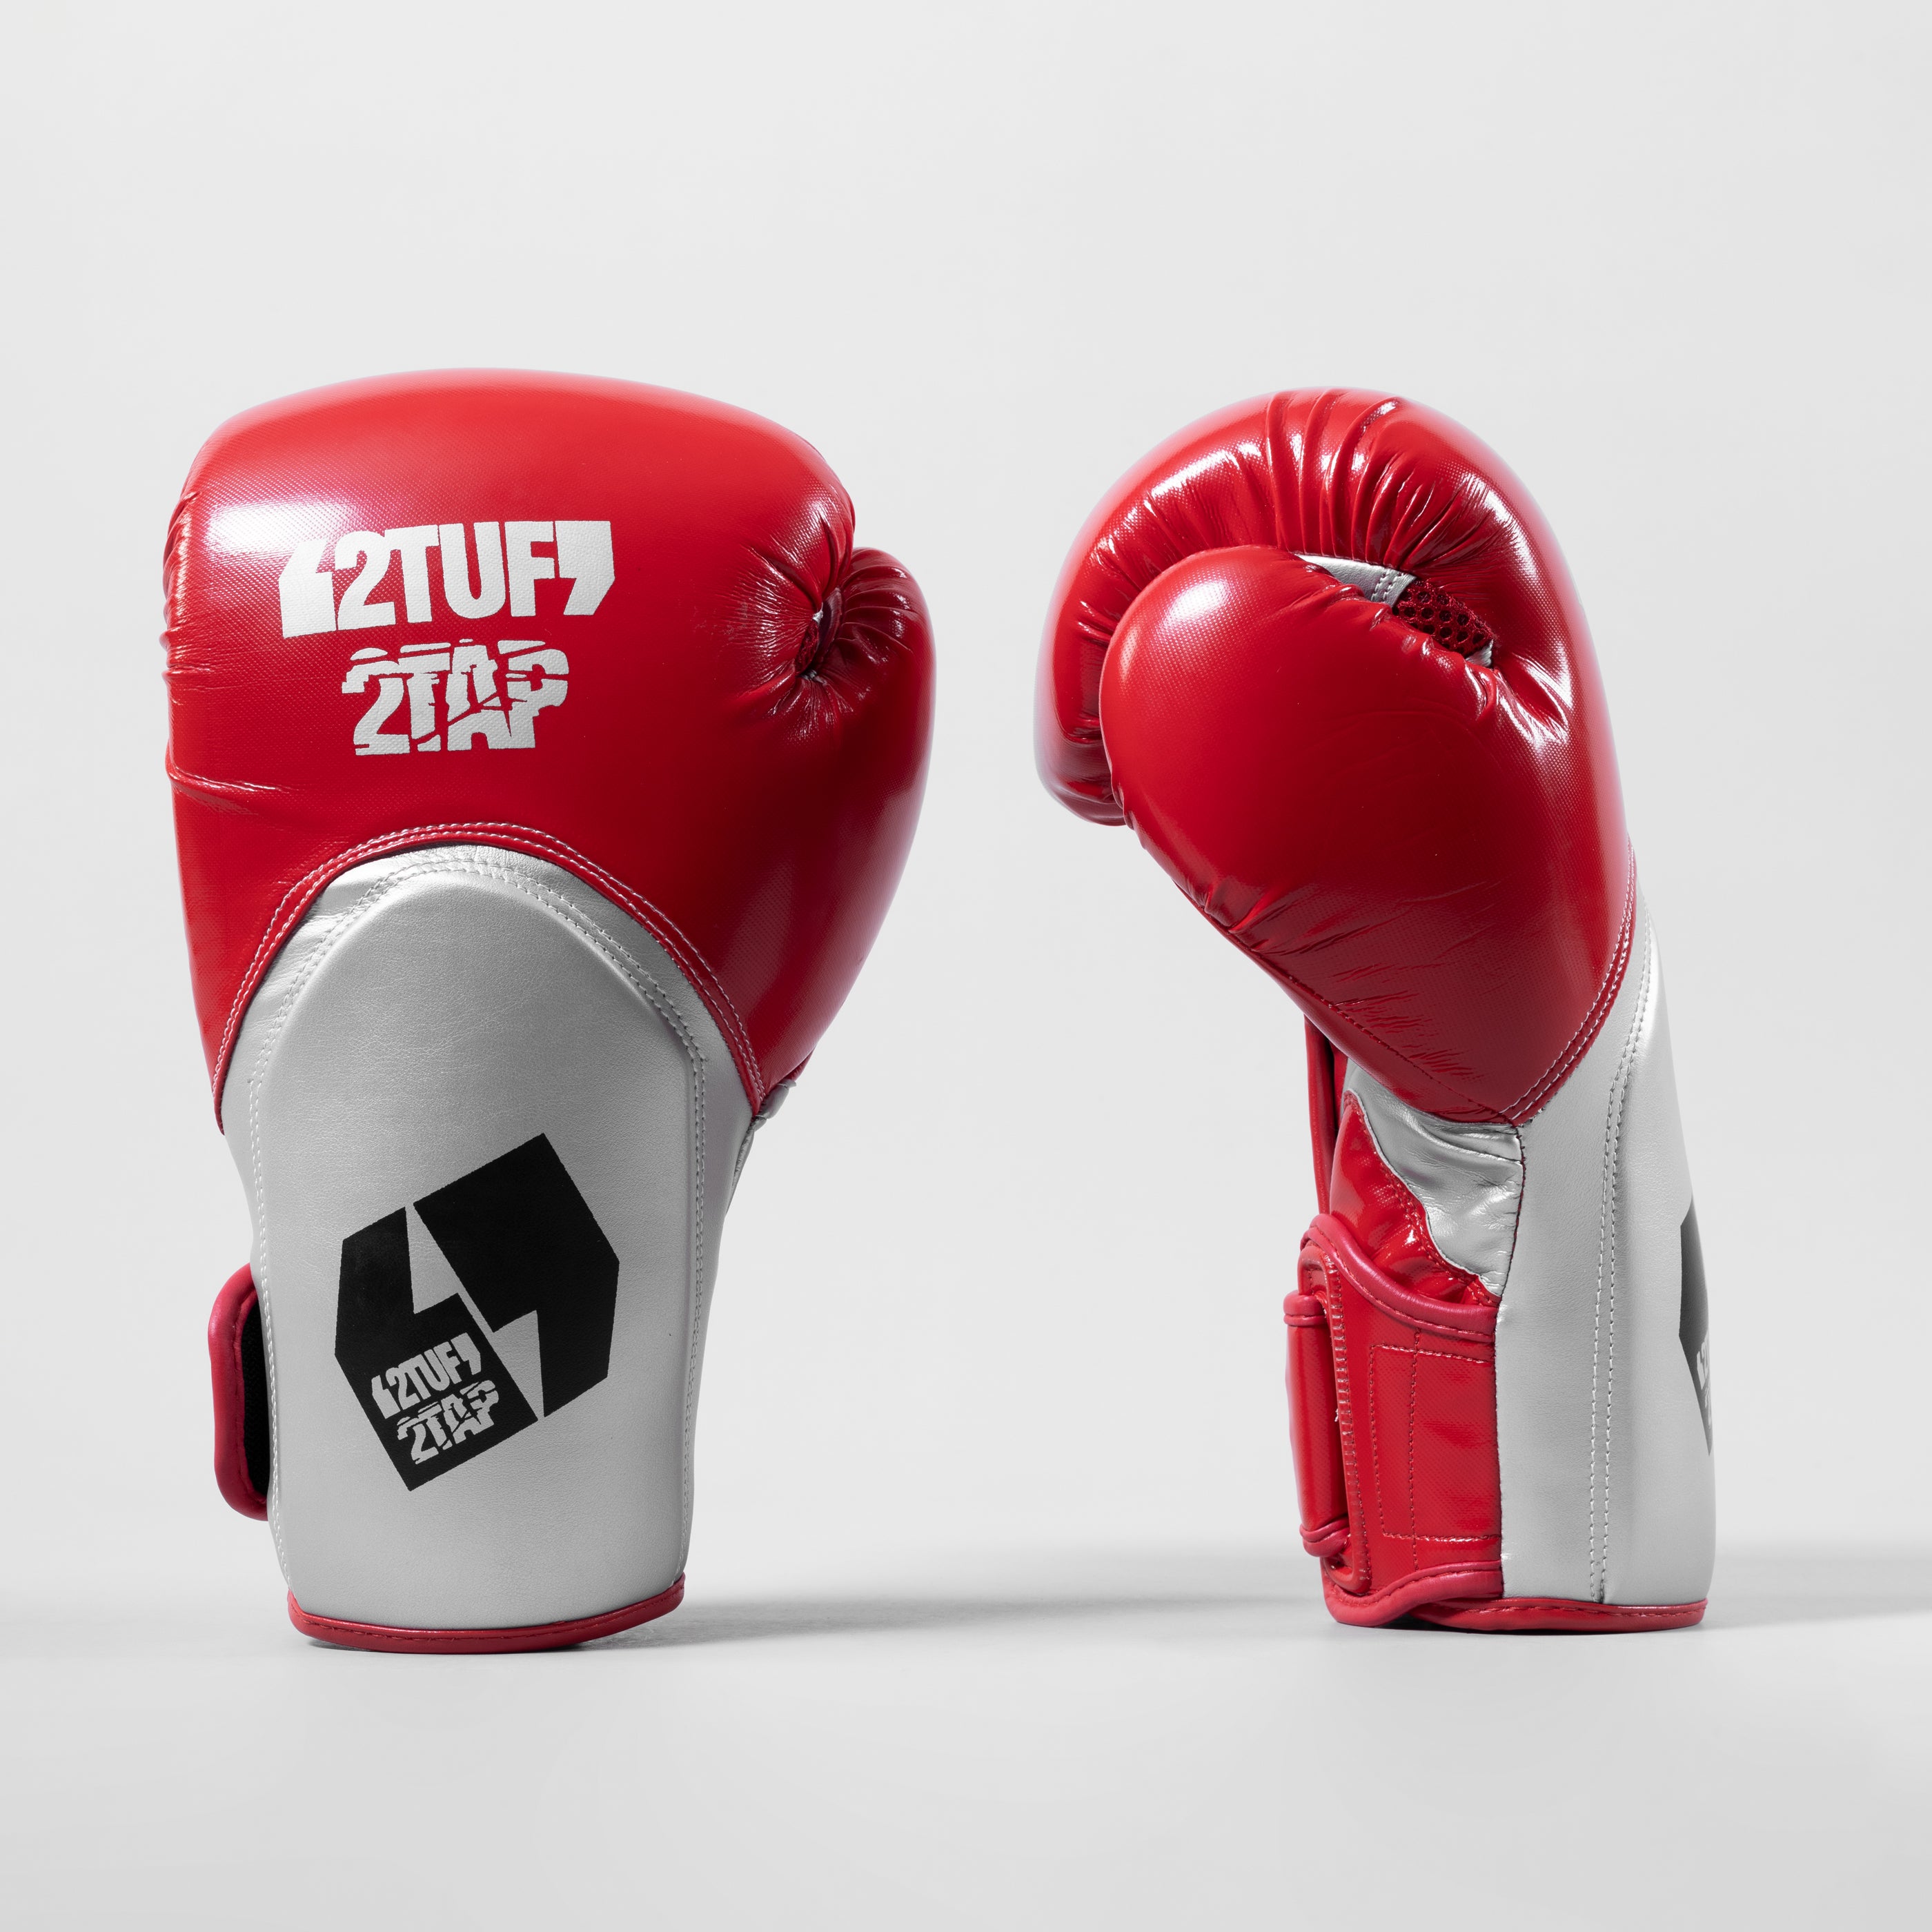 'Marauder' Boxing Gloves - Red/Silver 2TUF2TAP